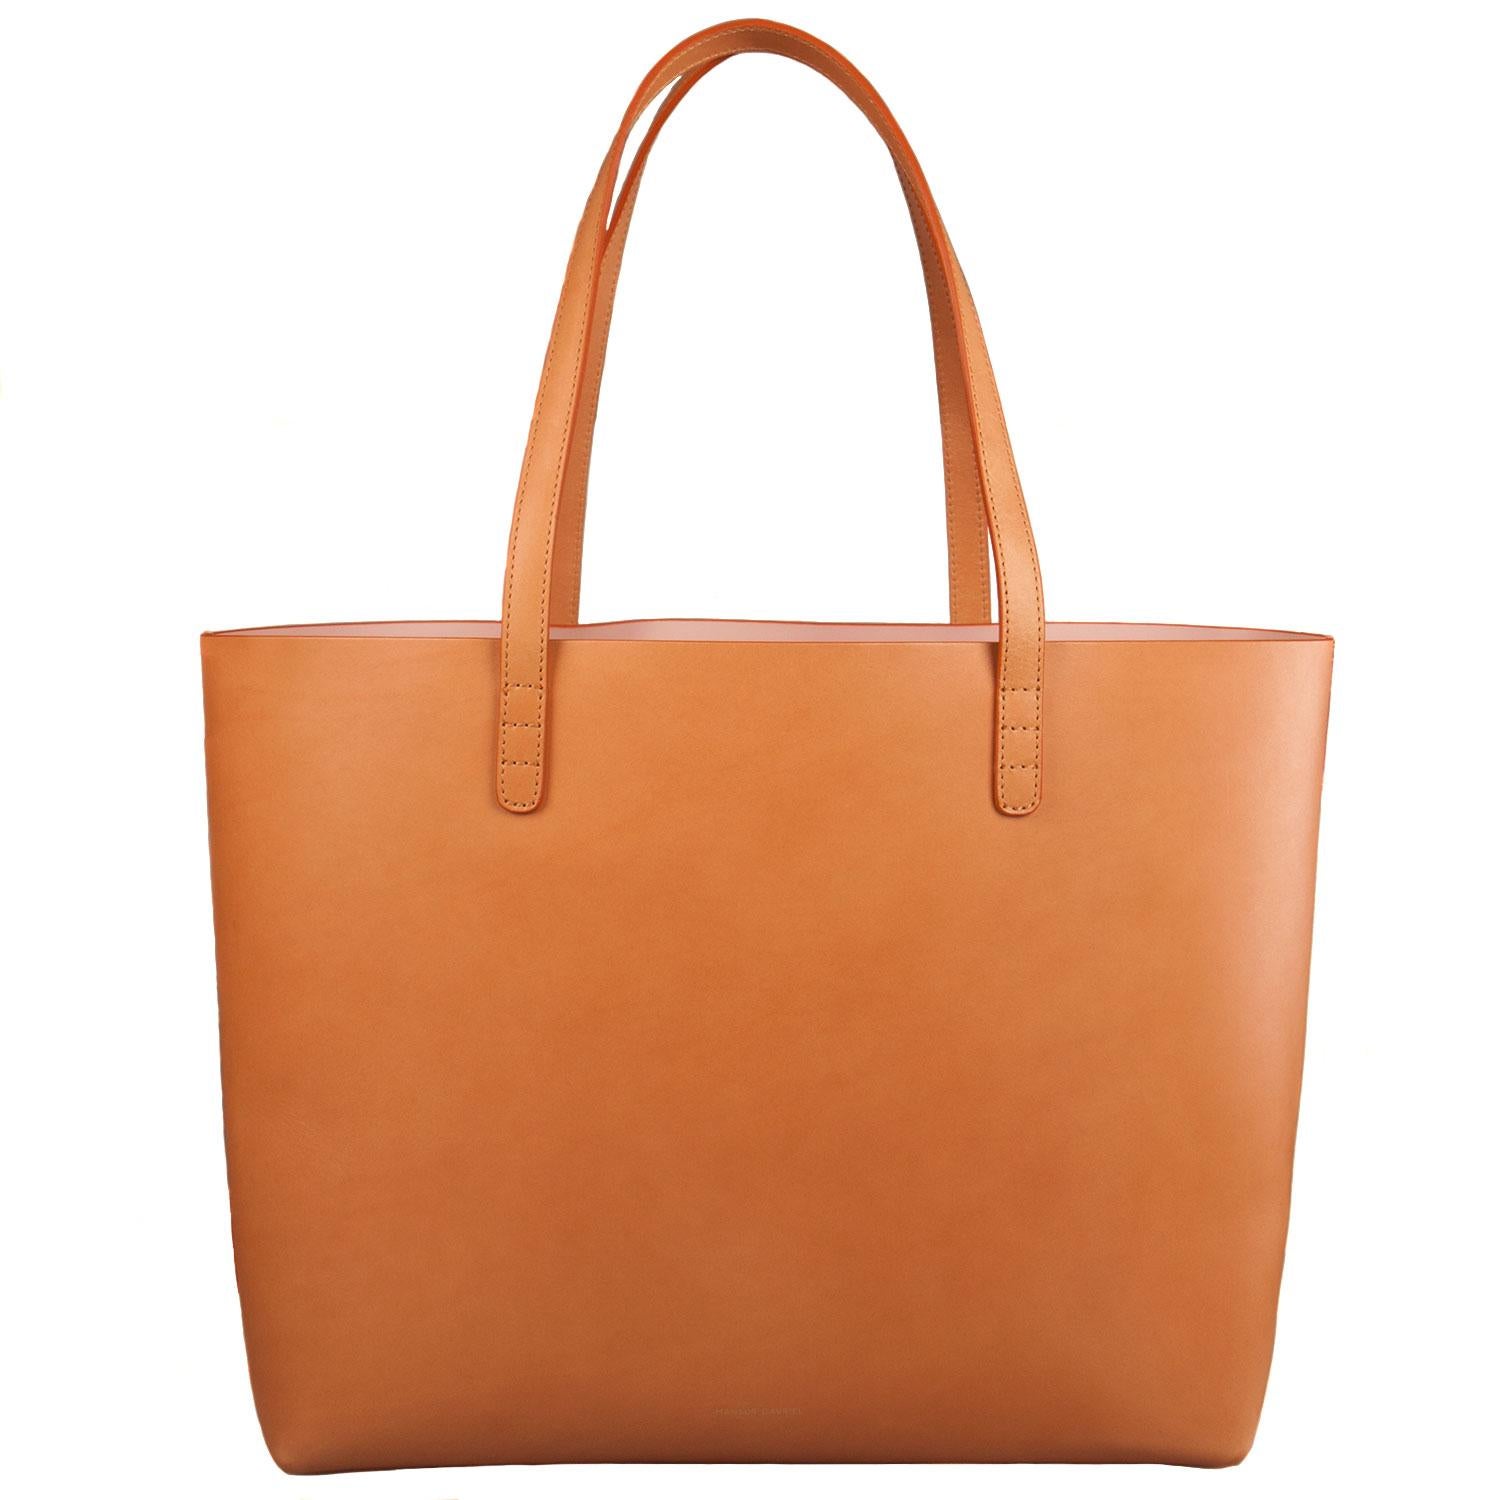 Masterfully crafted with leather and accompanied by a pouch, this luxurious tote essays functional fashion! This piece from Mansur Gavriel features two handles and a spacious leather interior. It will be a wonderful everyday accessory.

Includes: